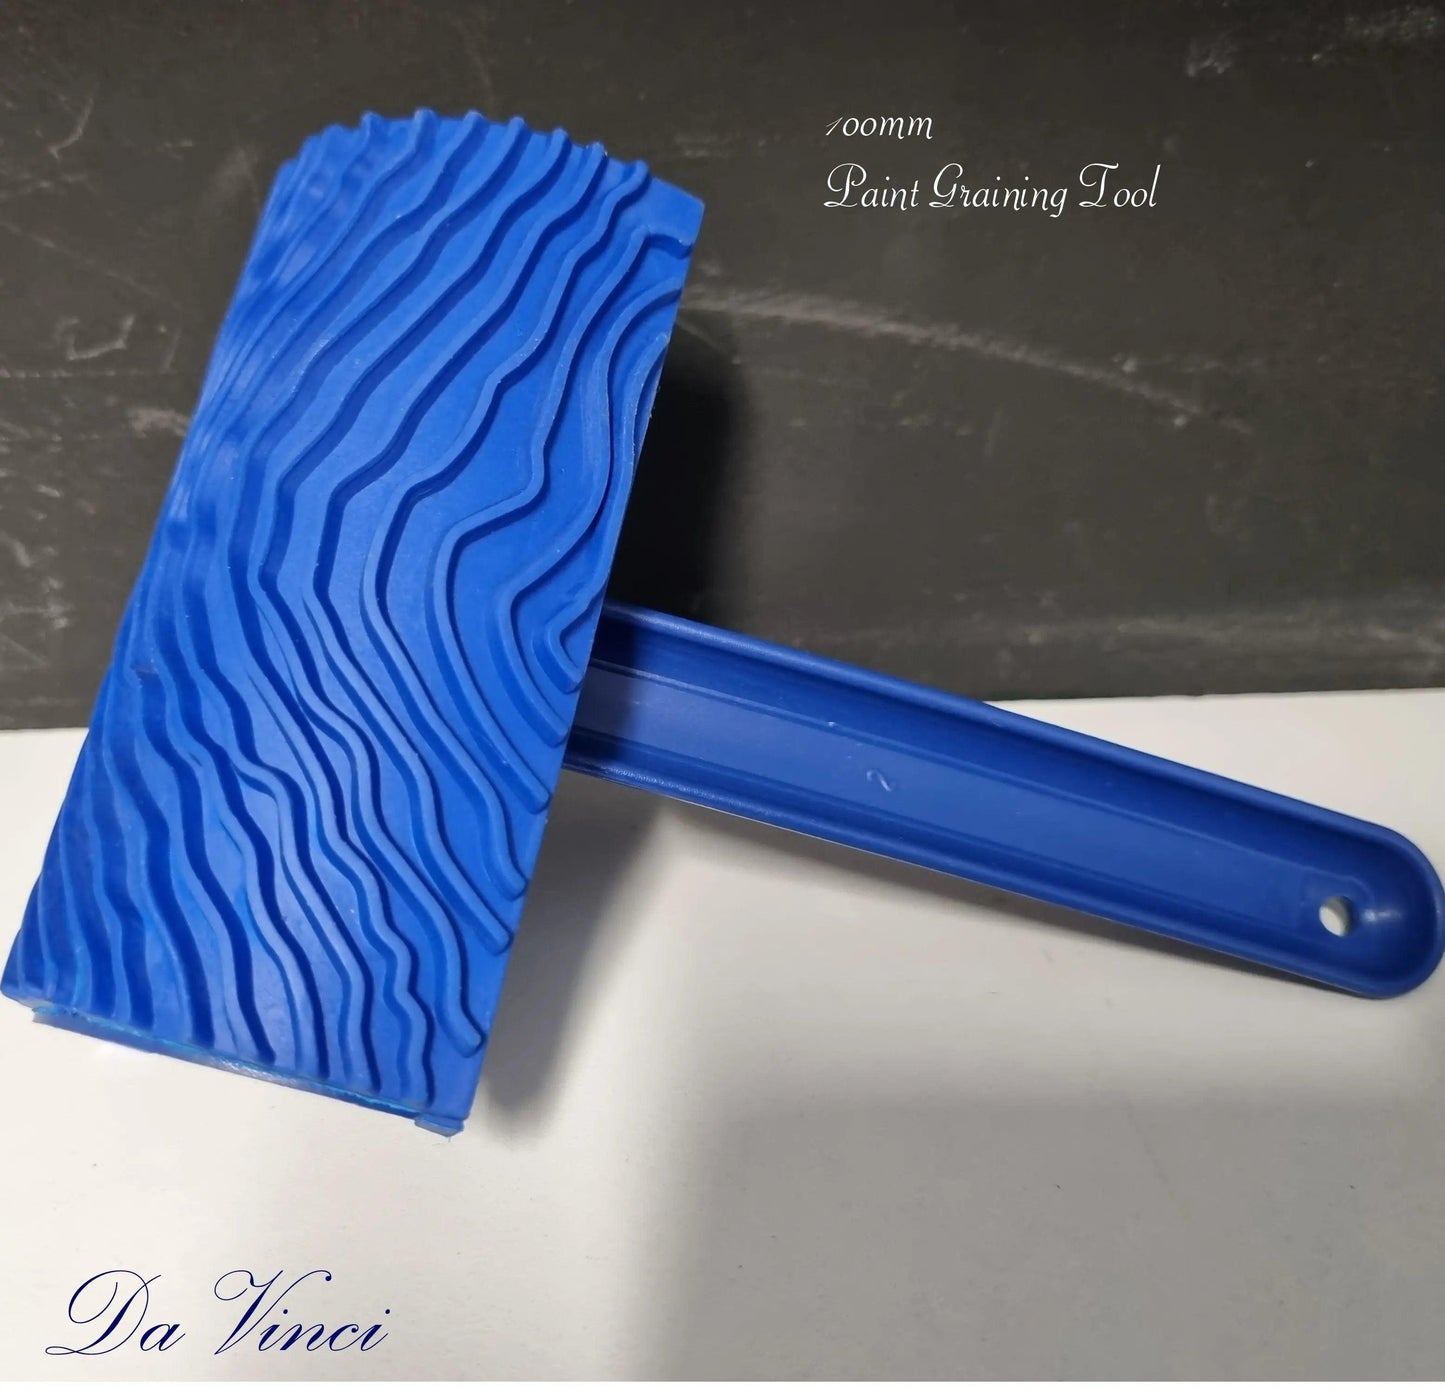 Products Trade Paint wood Grainer tool-effect Rocker 100mm - Vintique Concepts